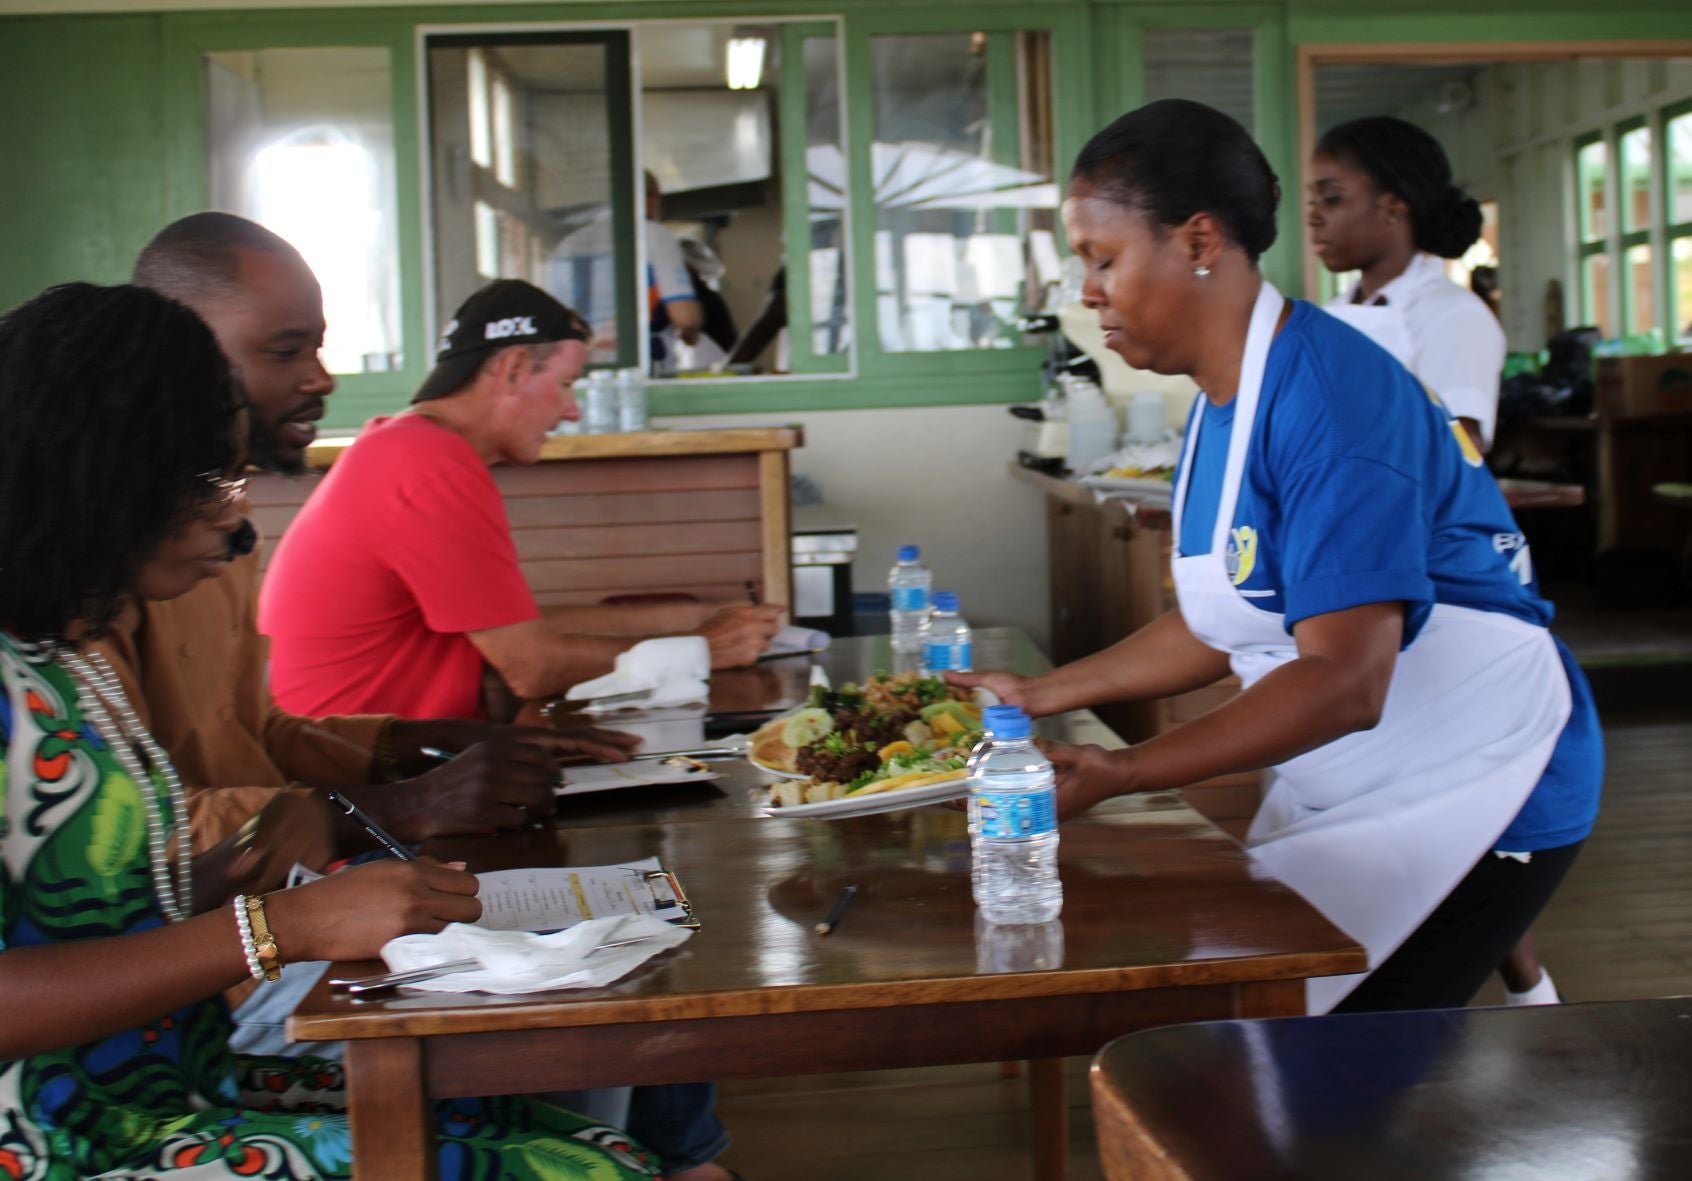 Minister Browne presenting her meal to the judges